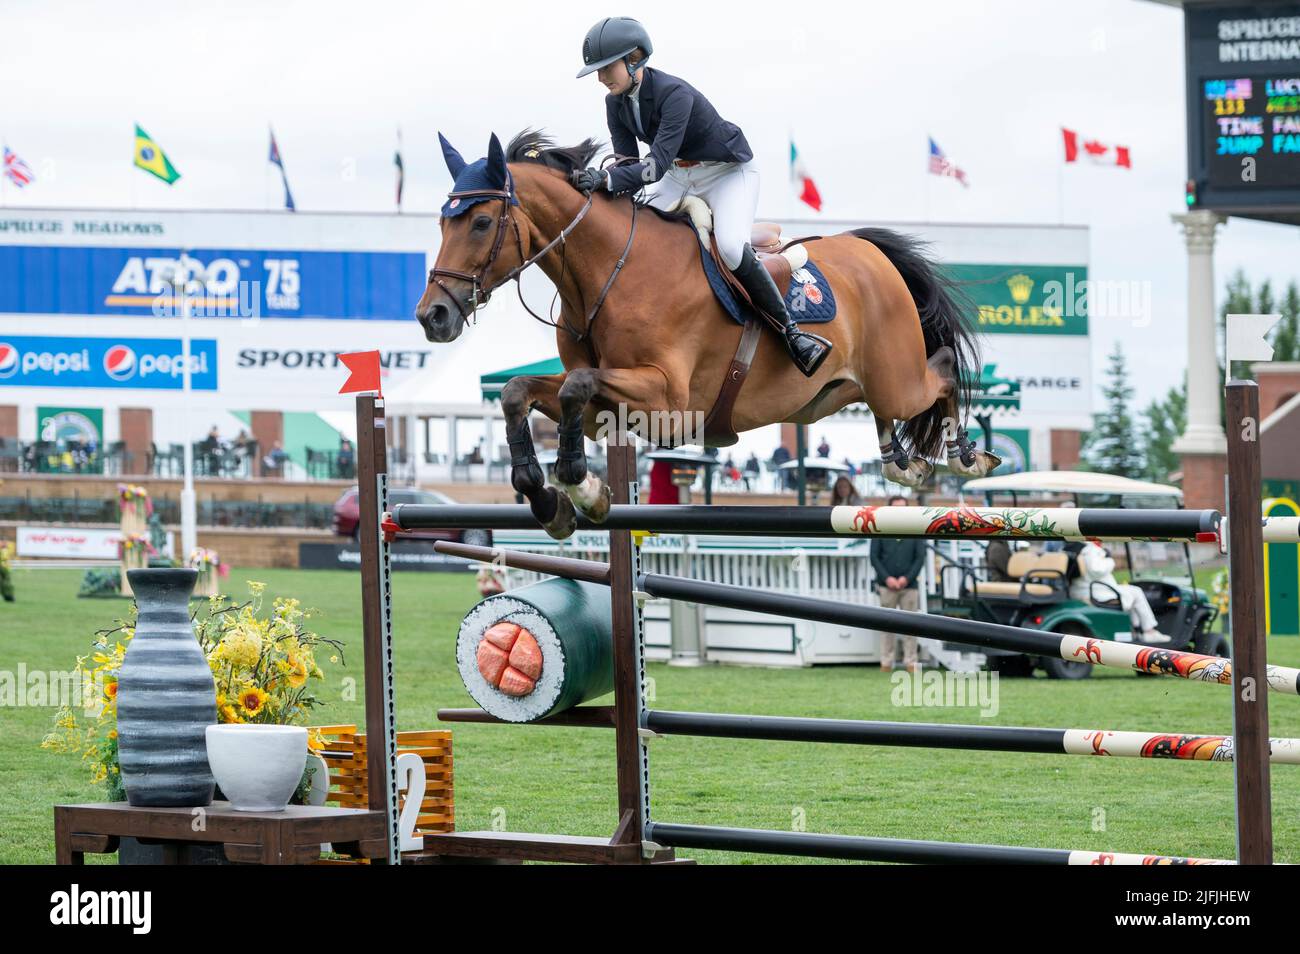 Calgary, Alberta, Kanada, 2022-07-03, Lucy Deslauriers (USA) reitet Hester, Spruce Meadows International Showjumping, Pan American Cup by Rolex. Stockfoto